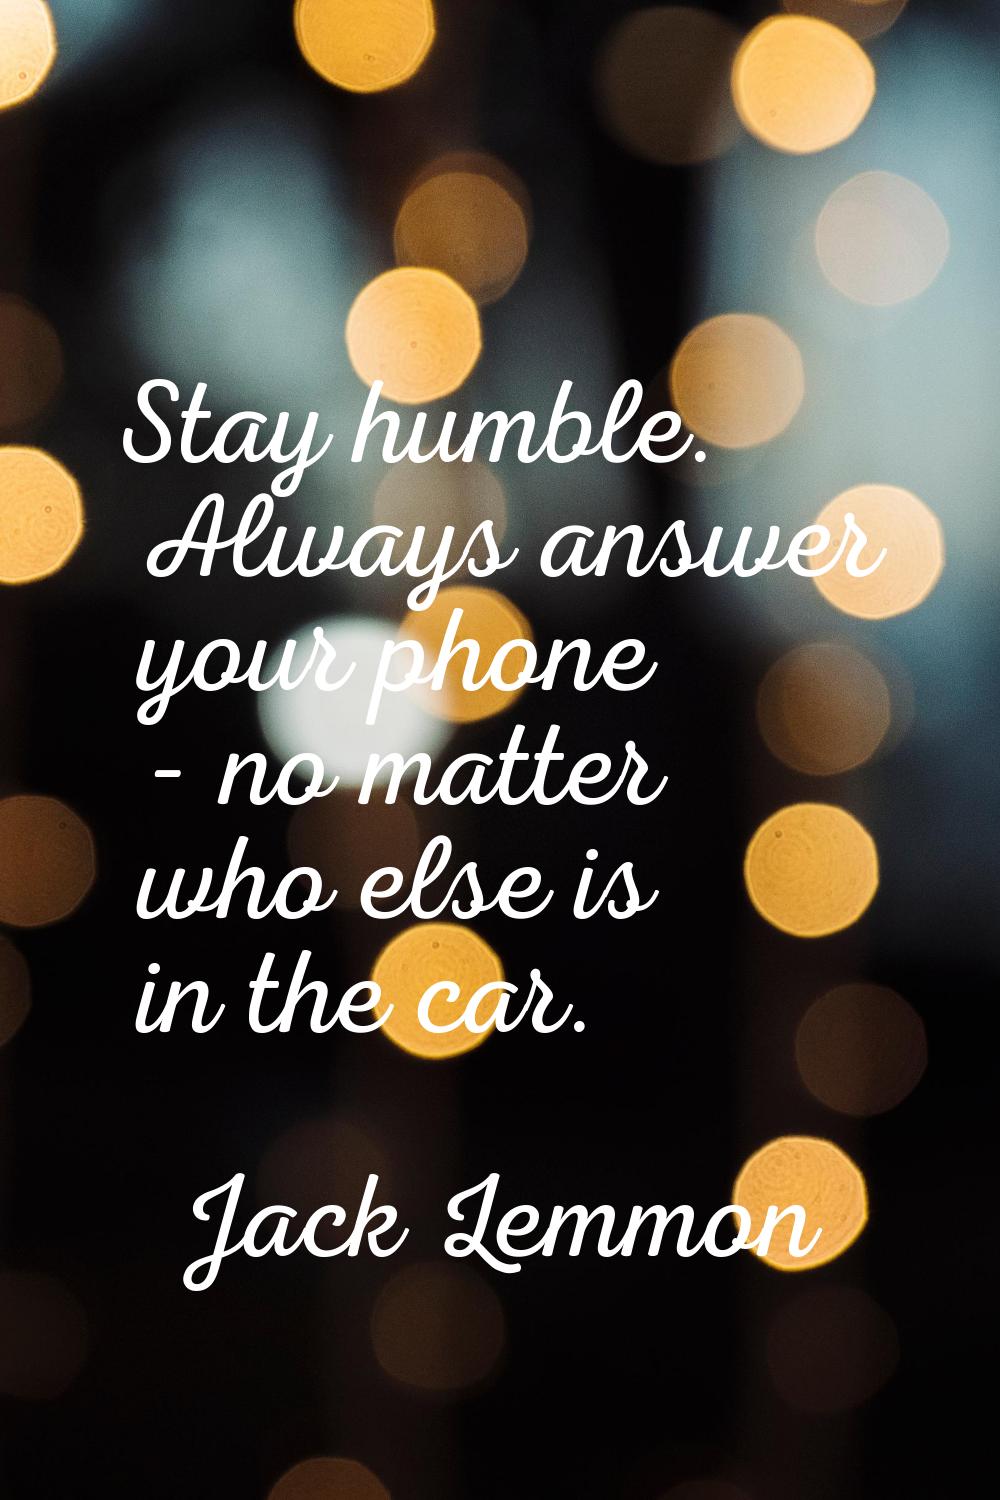 Stay humble. Always answer your phone - no matter who else is in the car.